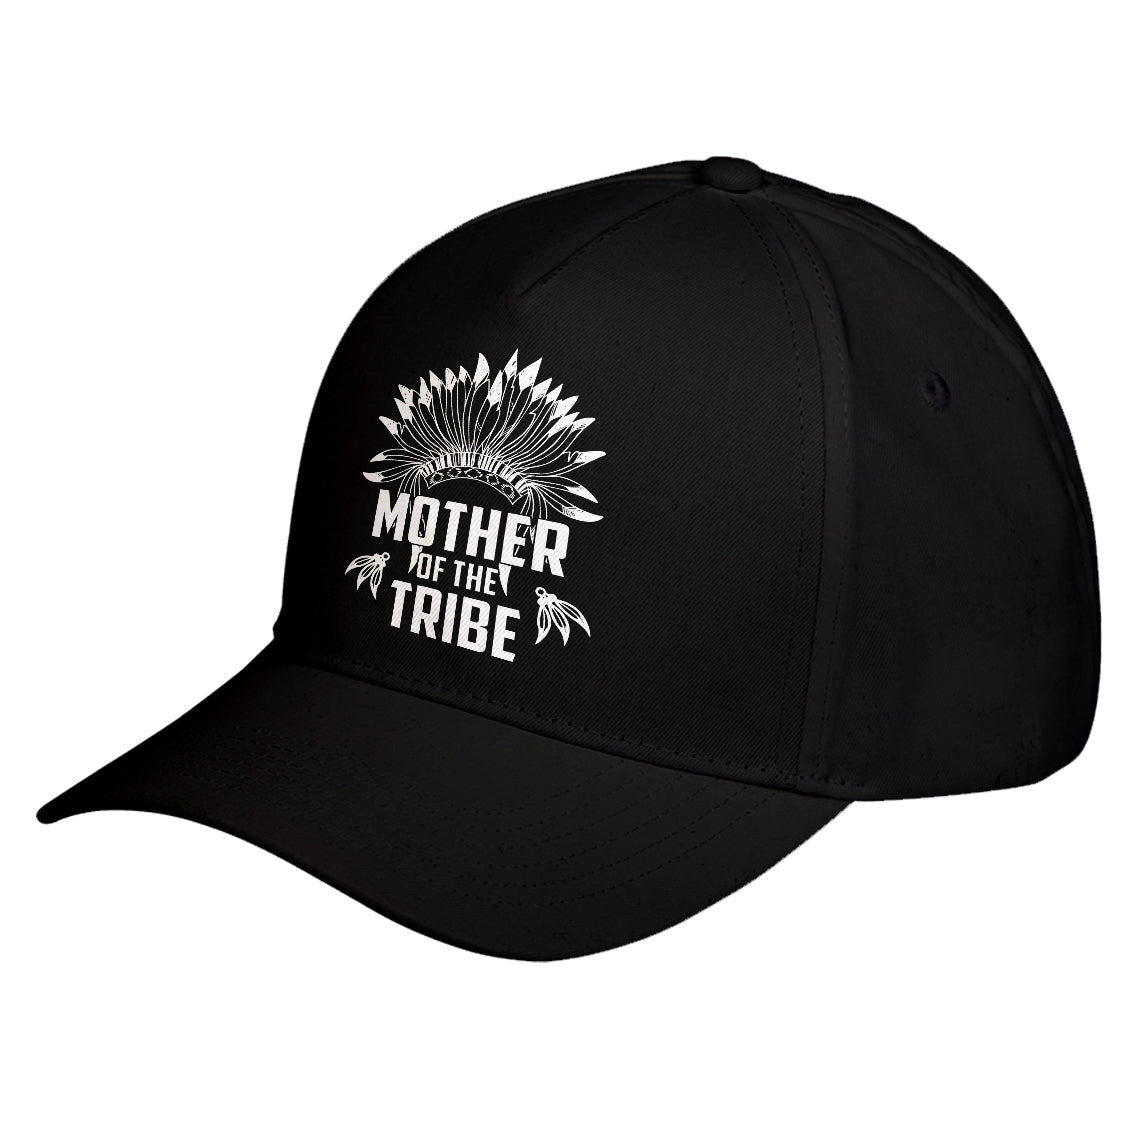 Hat Mother of the Tribe Baseball Cap